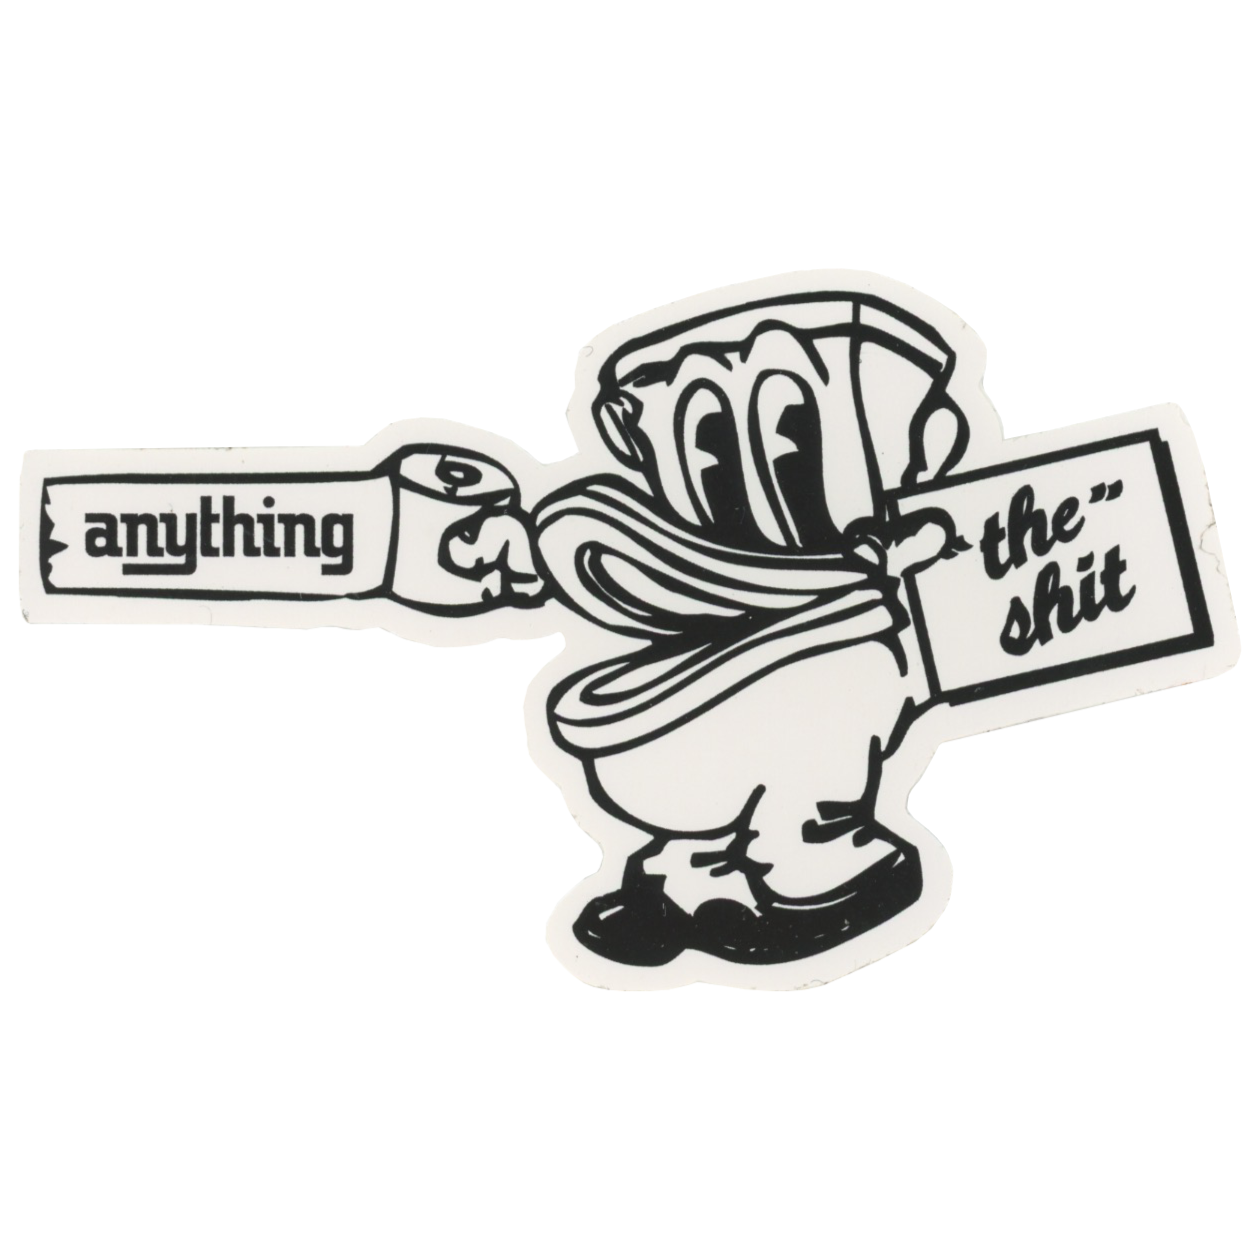 A NY Thing The Shit Toilet Character Sticker